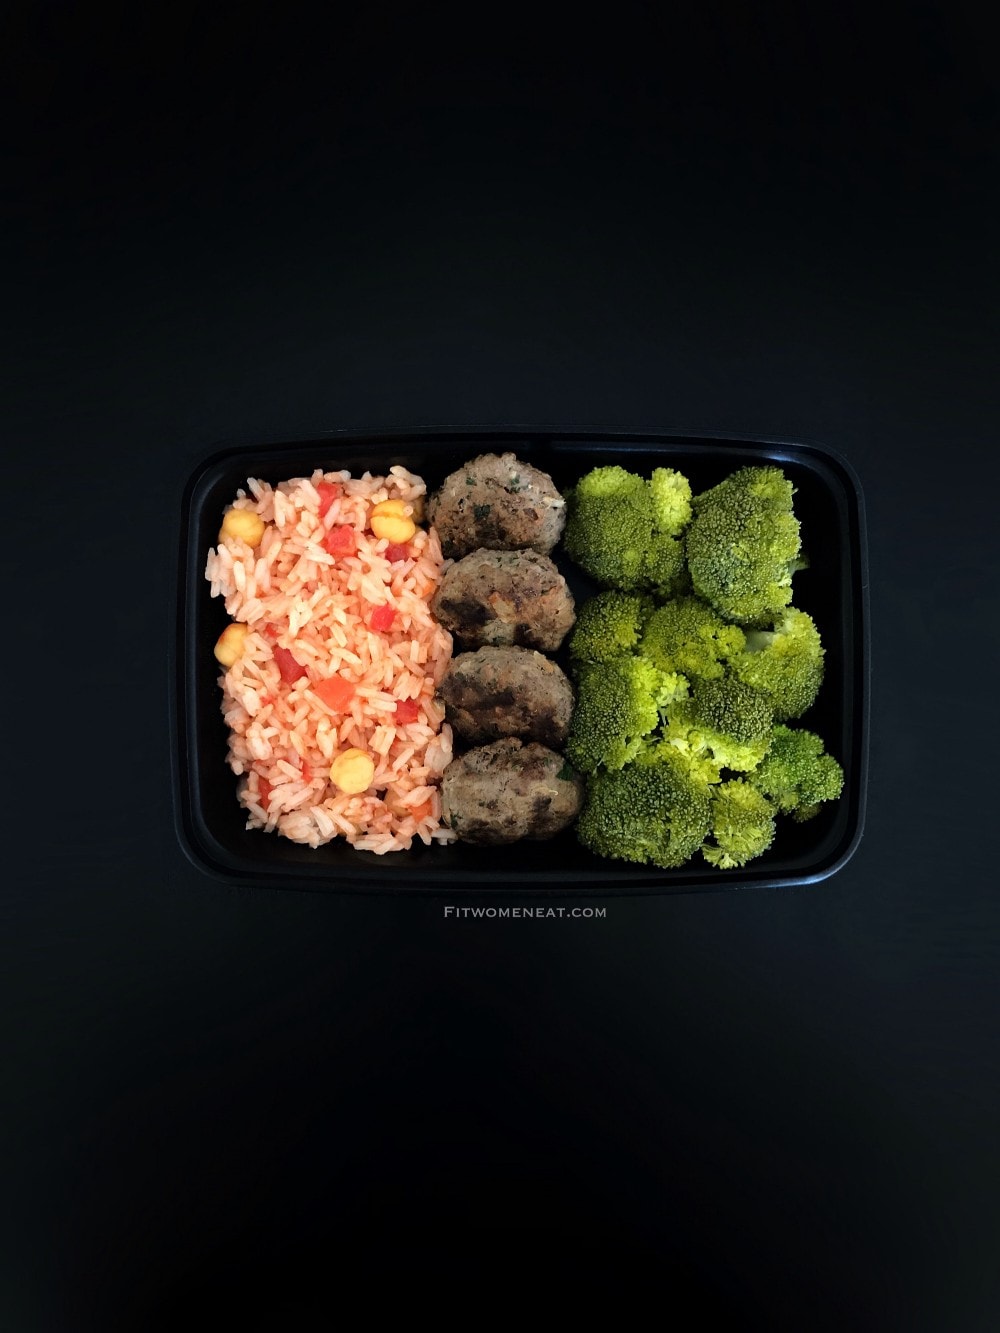 Tomato and Chickpea Rice with Beef Patties and Steamed Broccoli